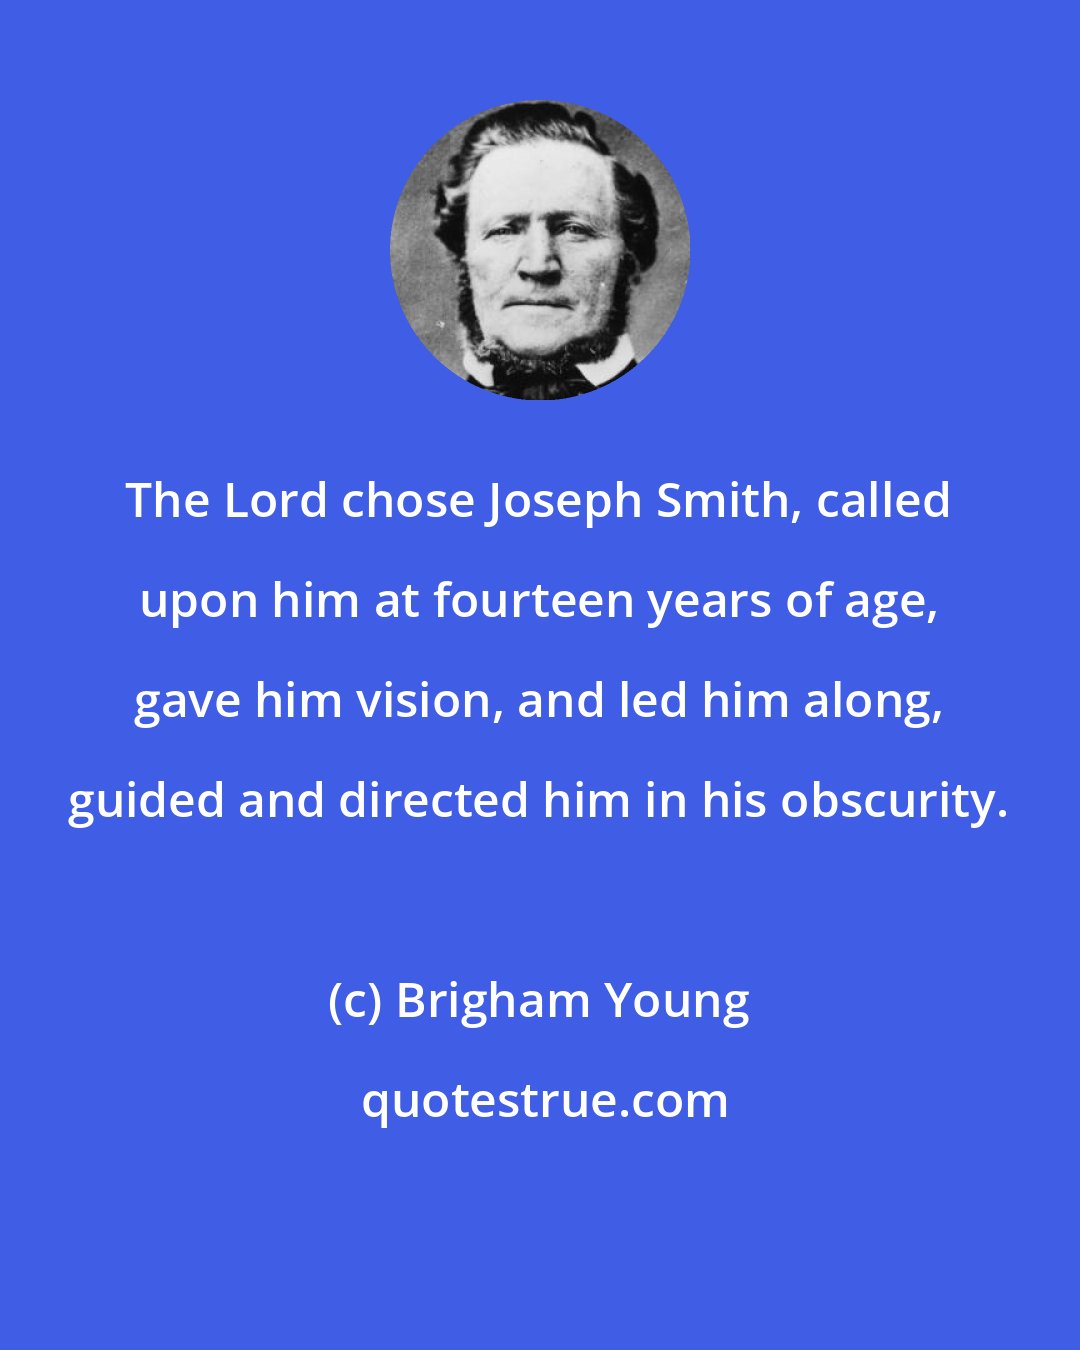 Brigham Young: The Lord chose Joseph Smith, called upon him at fourteen years of age, gave him vision, and led him along, guided and directed him in his obscurity.